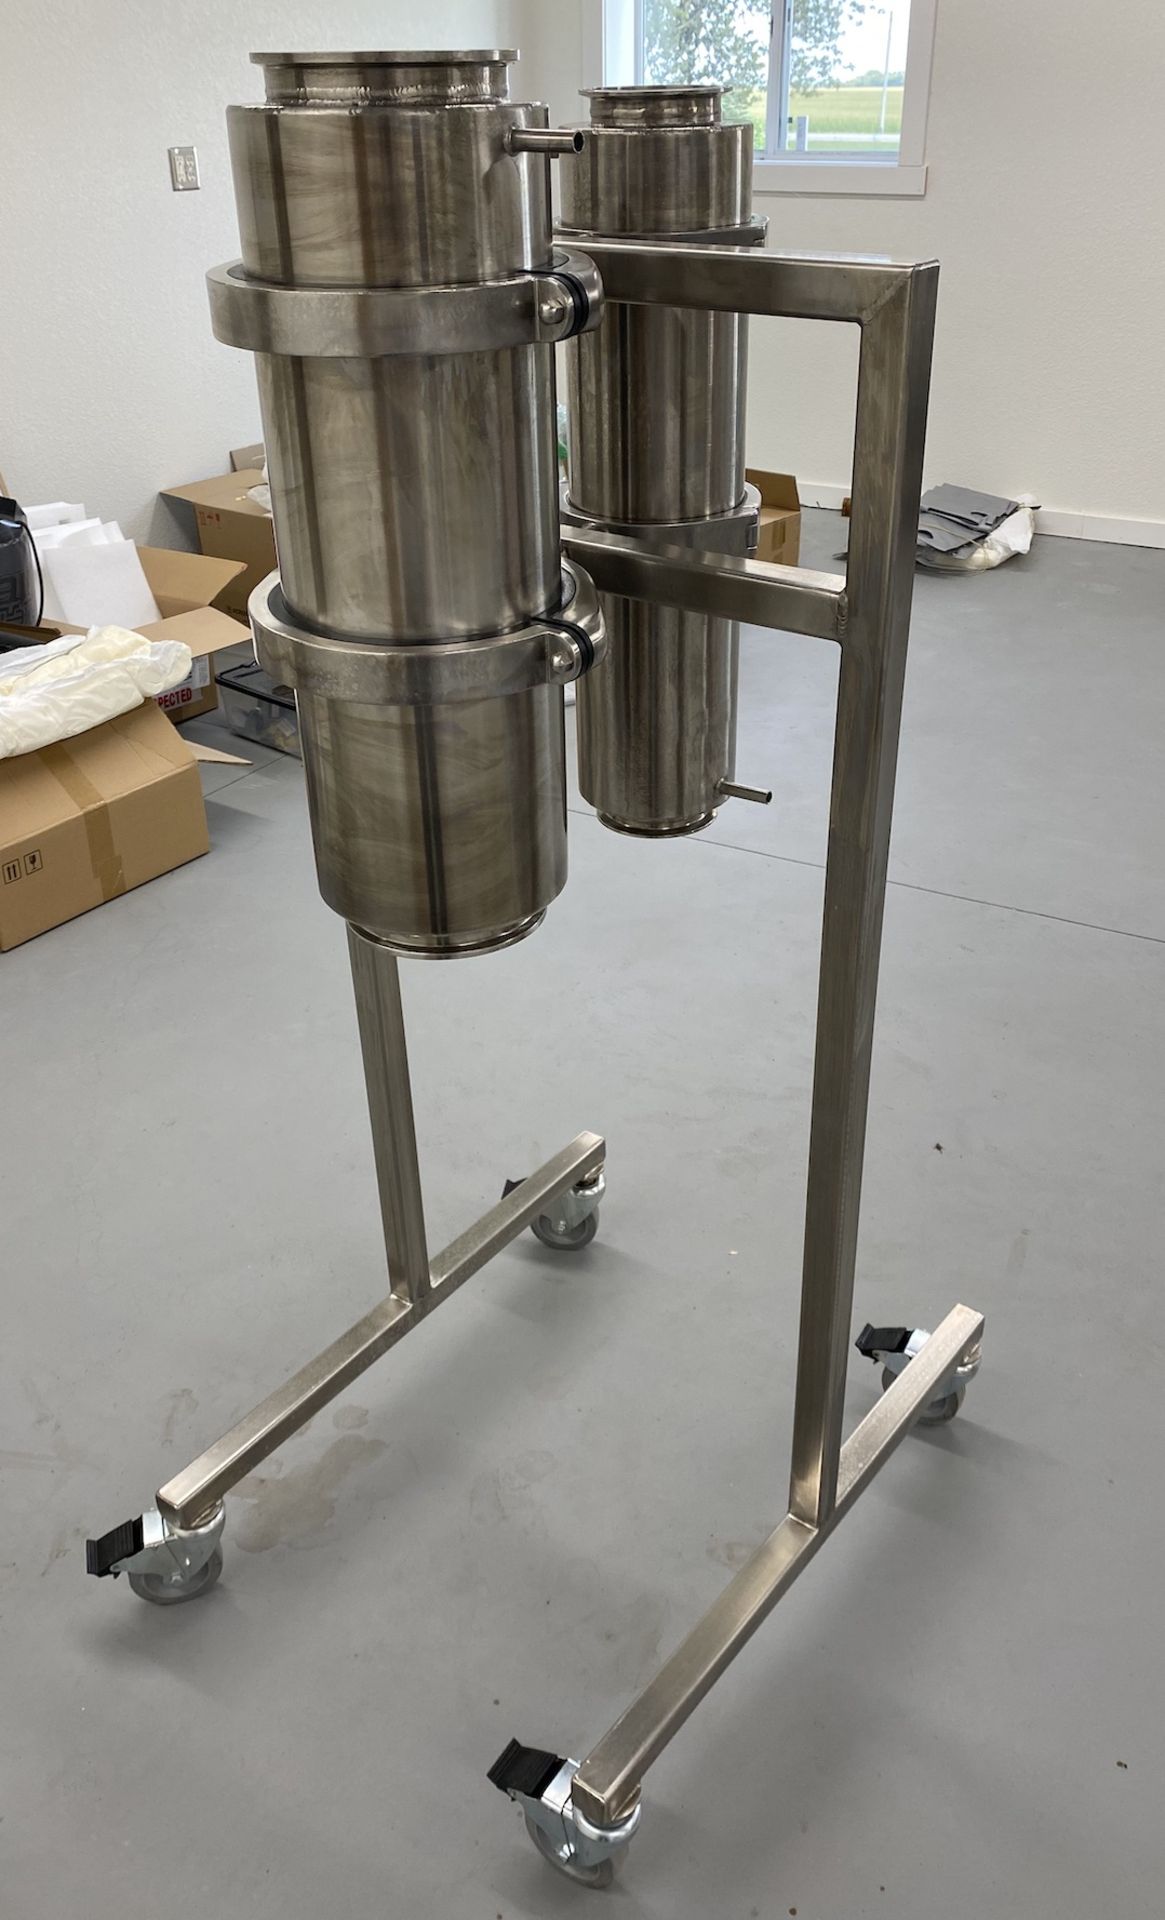 Used- Custom Pinnacle Stainless Chromatography/Filtration System. Comes with all clamps, gaskets etc